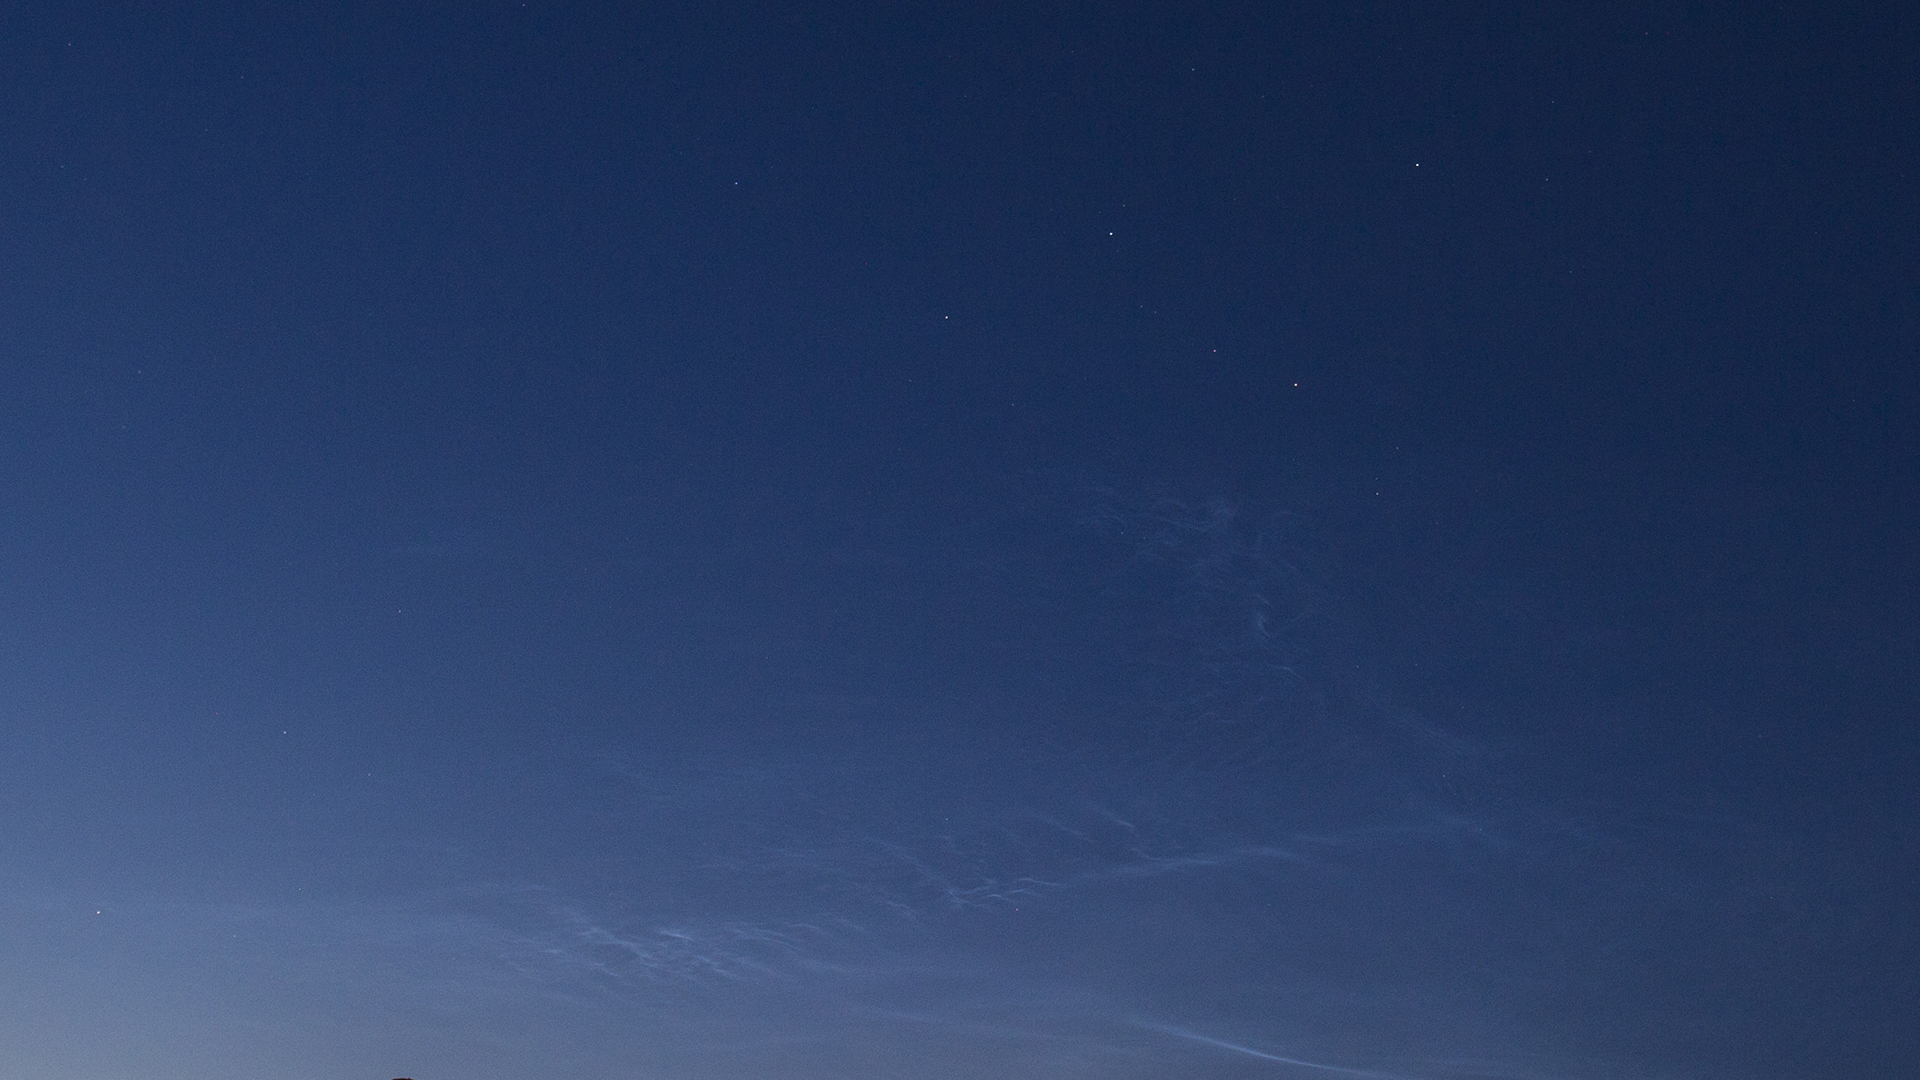 Noctilucent Clouds (2019:06:17 21:28:02 UT, Canon EOS 6D, 2.5s, f/4.5, f=24mm, ISO 200)